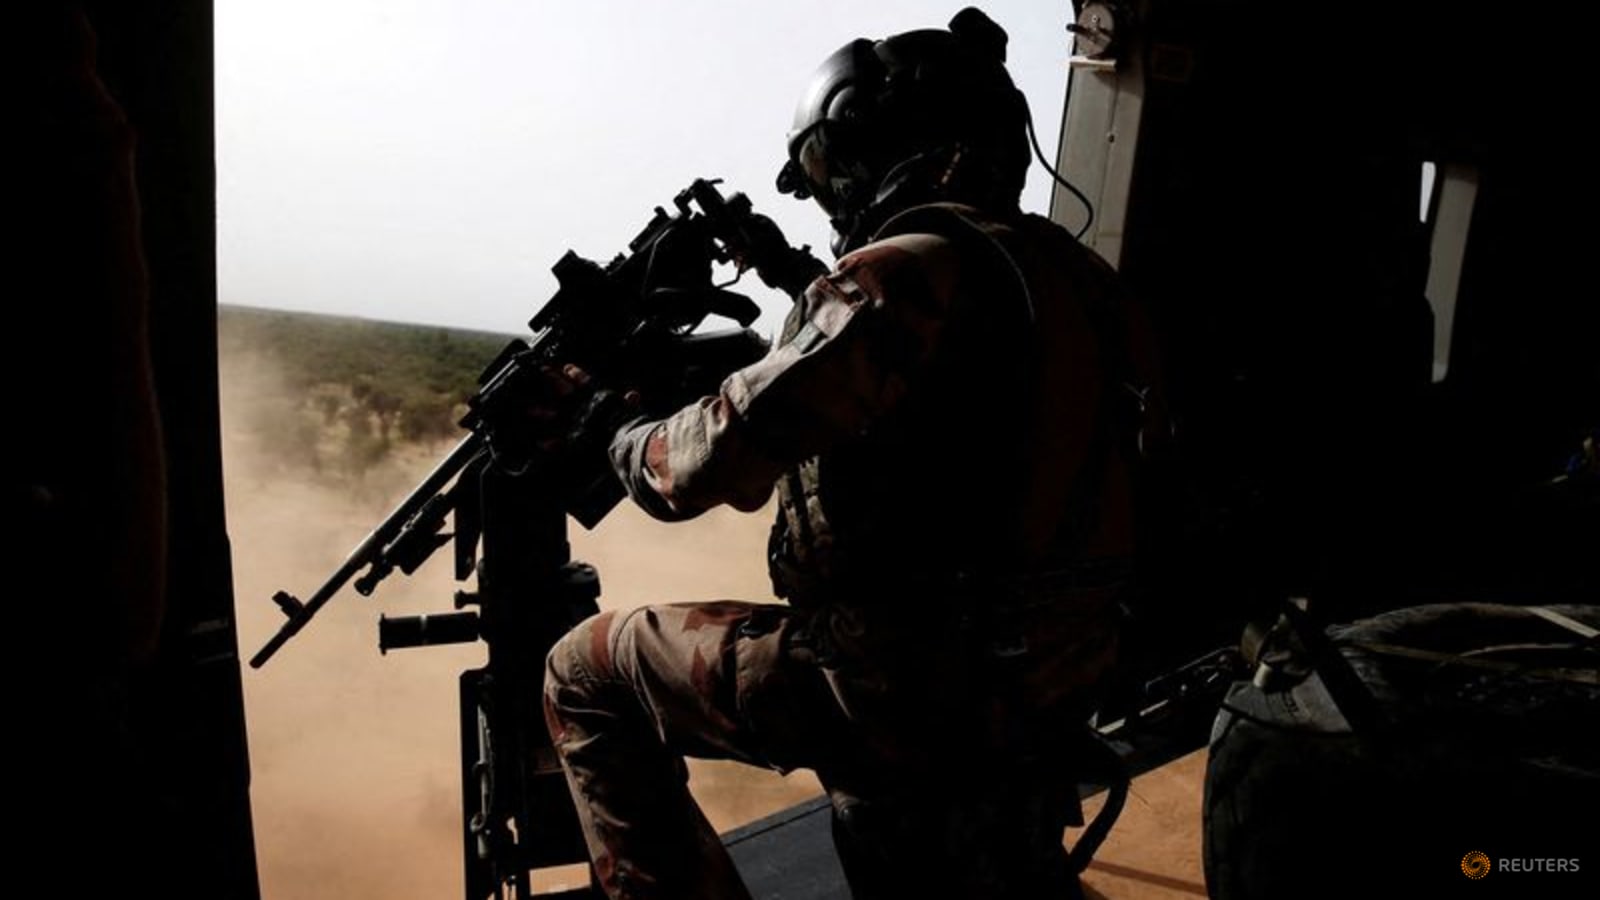 France says Mali standoff untenable, junta 'out of control'